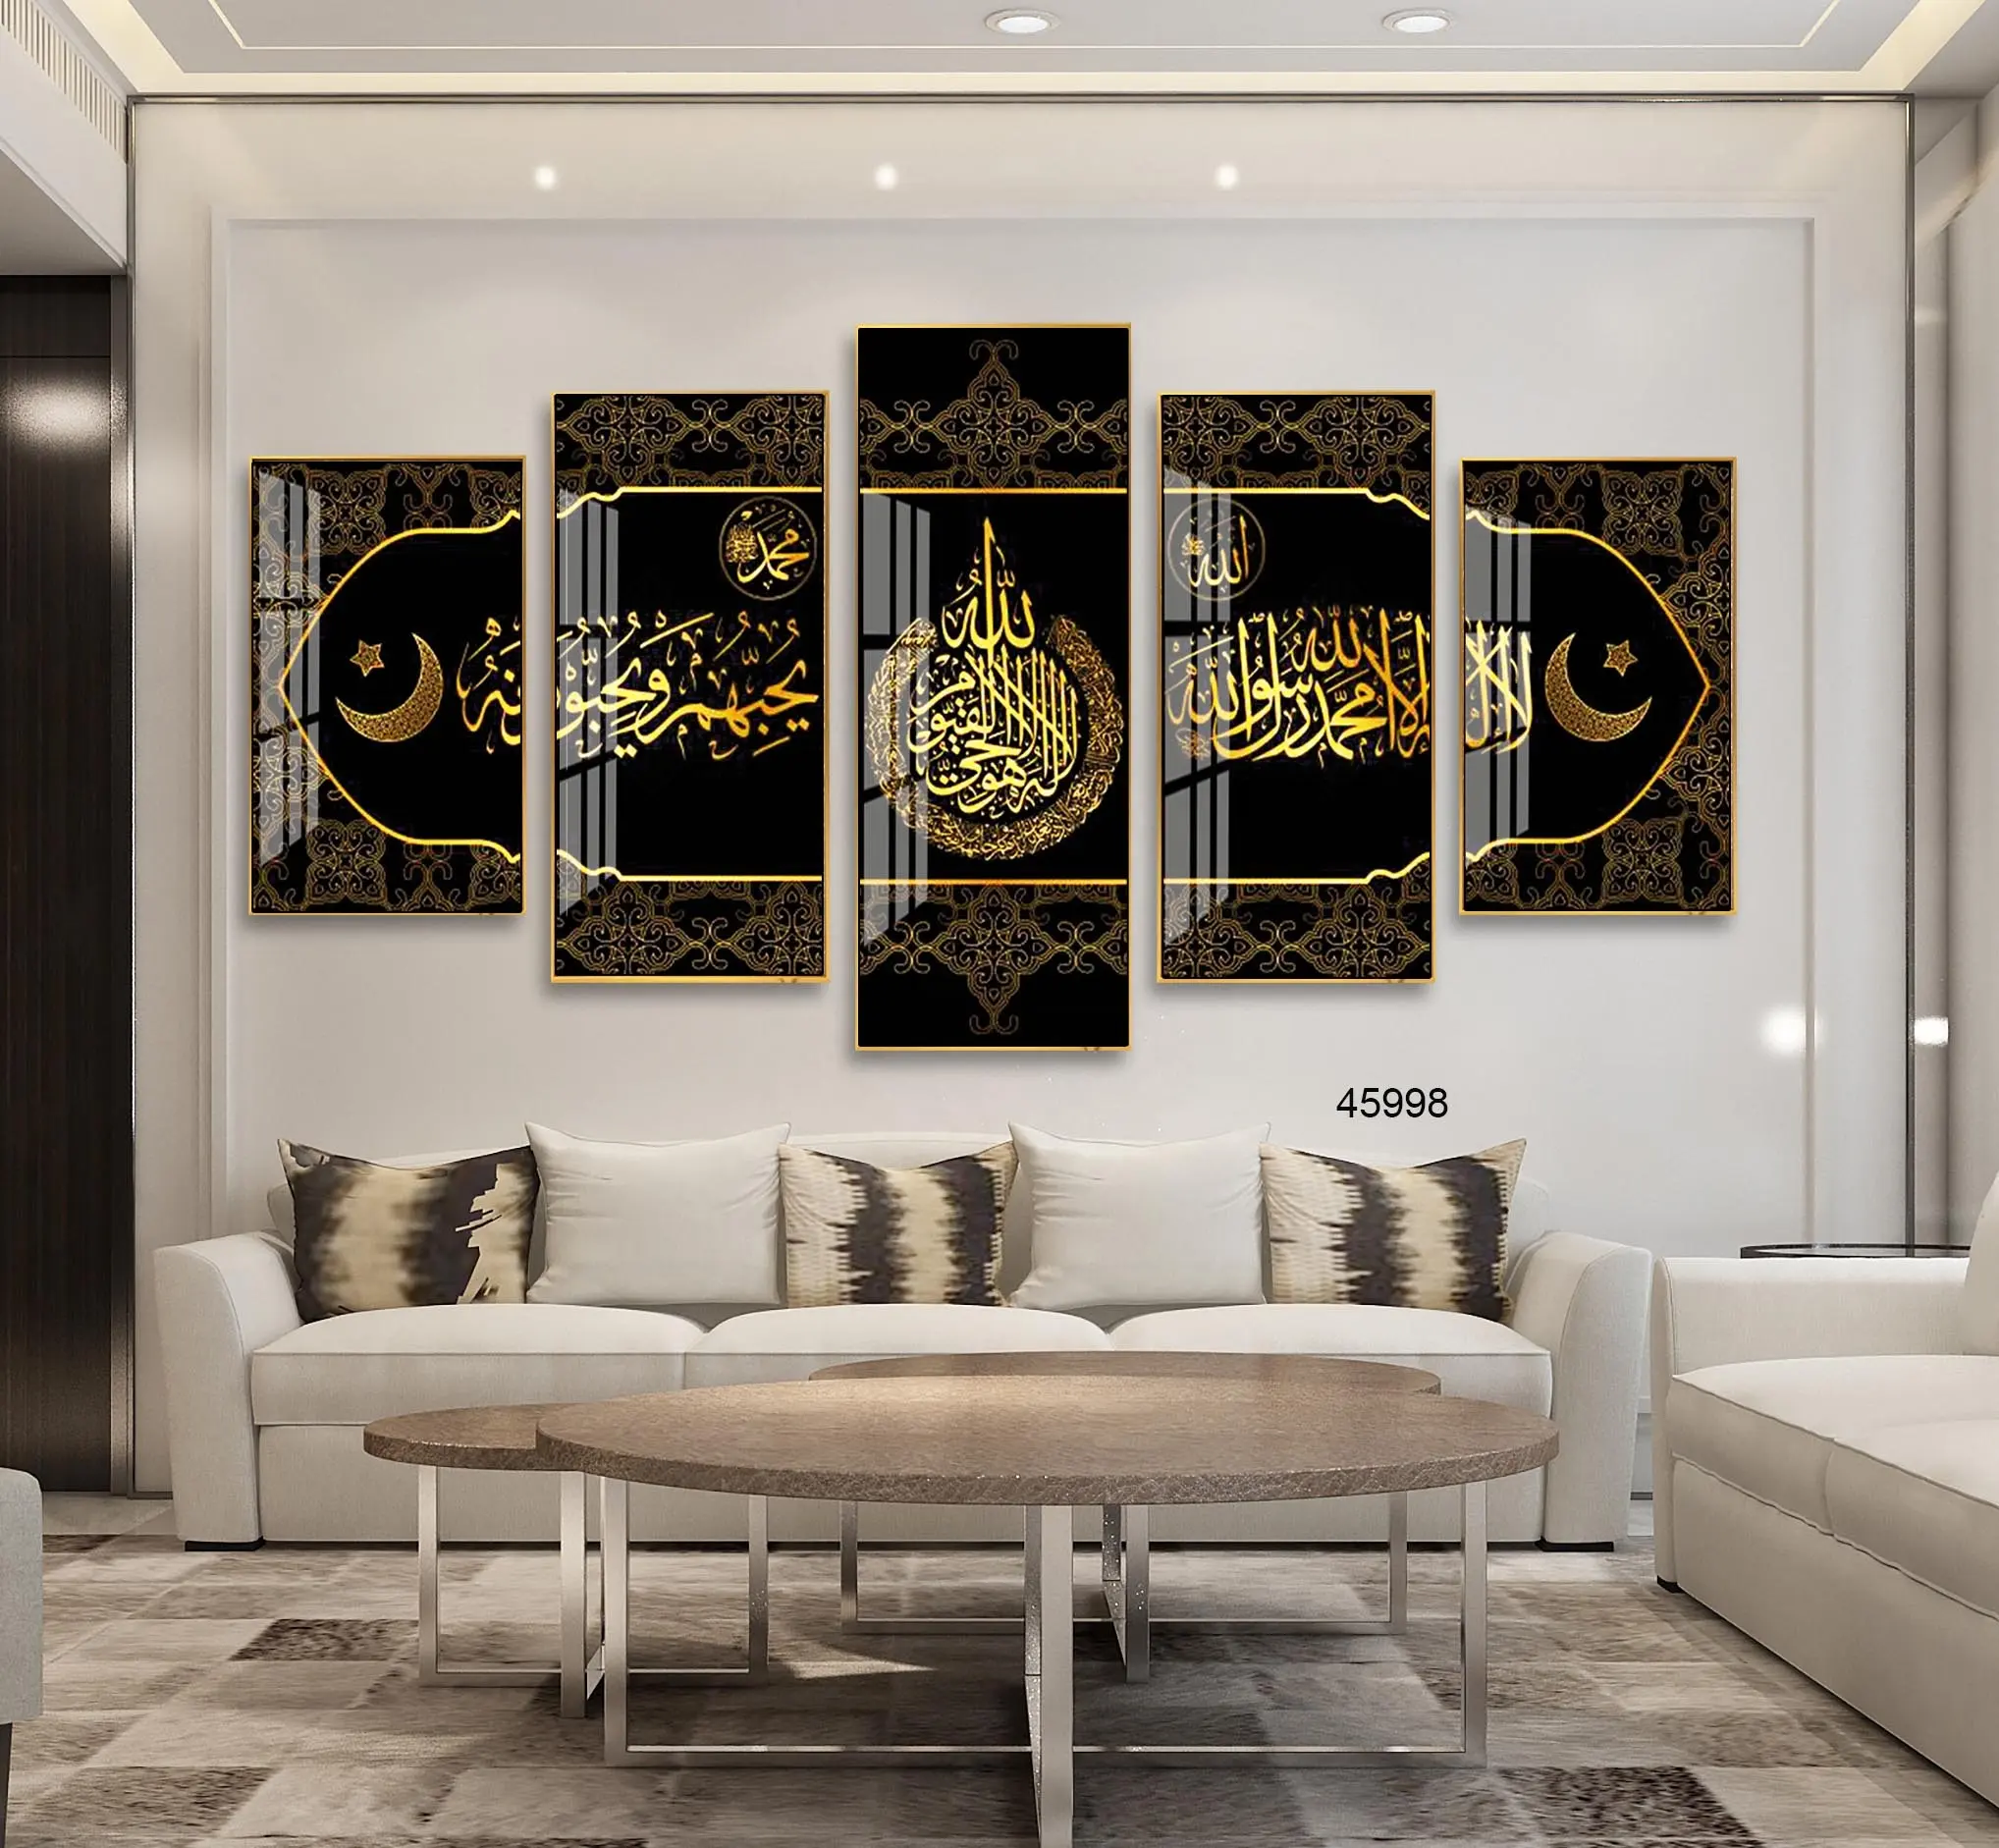 Wholesale Islamic Frames Arabic Calligraphy Wall Art Muslims Pictures Crystal Porcelain Painting Prints 5 Piece Wall Art